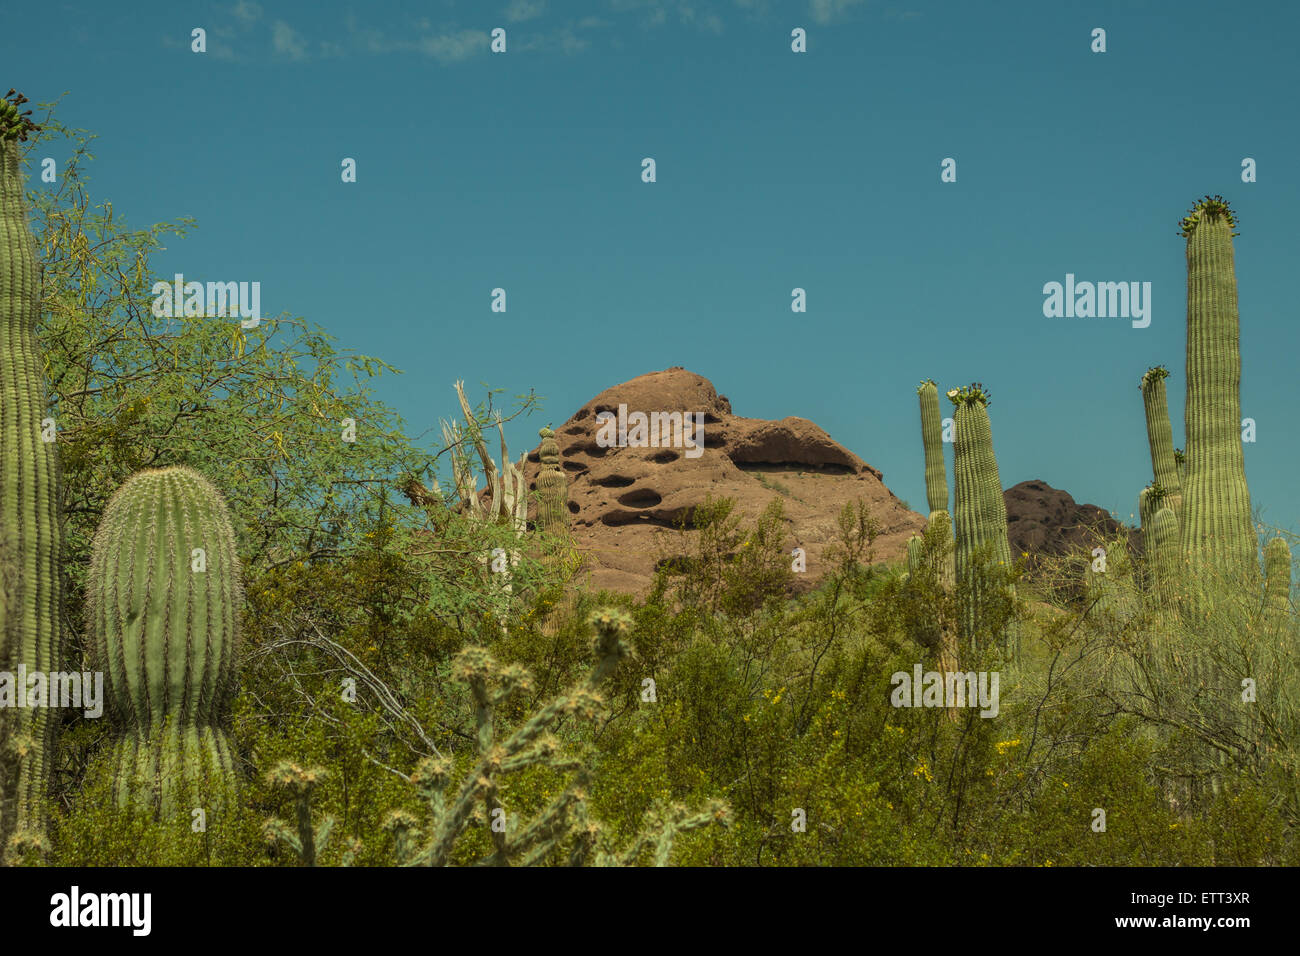 The Alien and Beautiful Life of the Desert in the Southwest USA Stock Photo